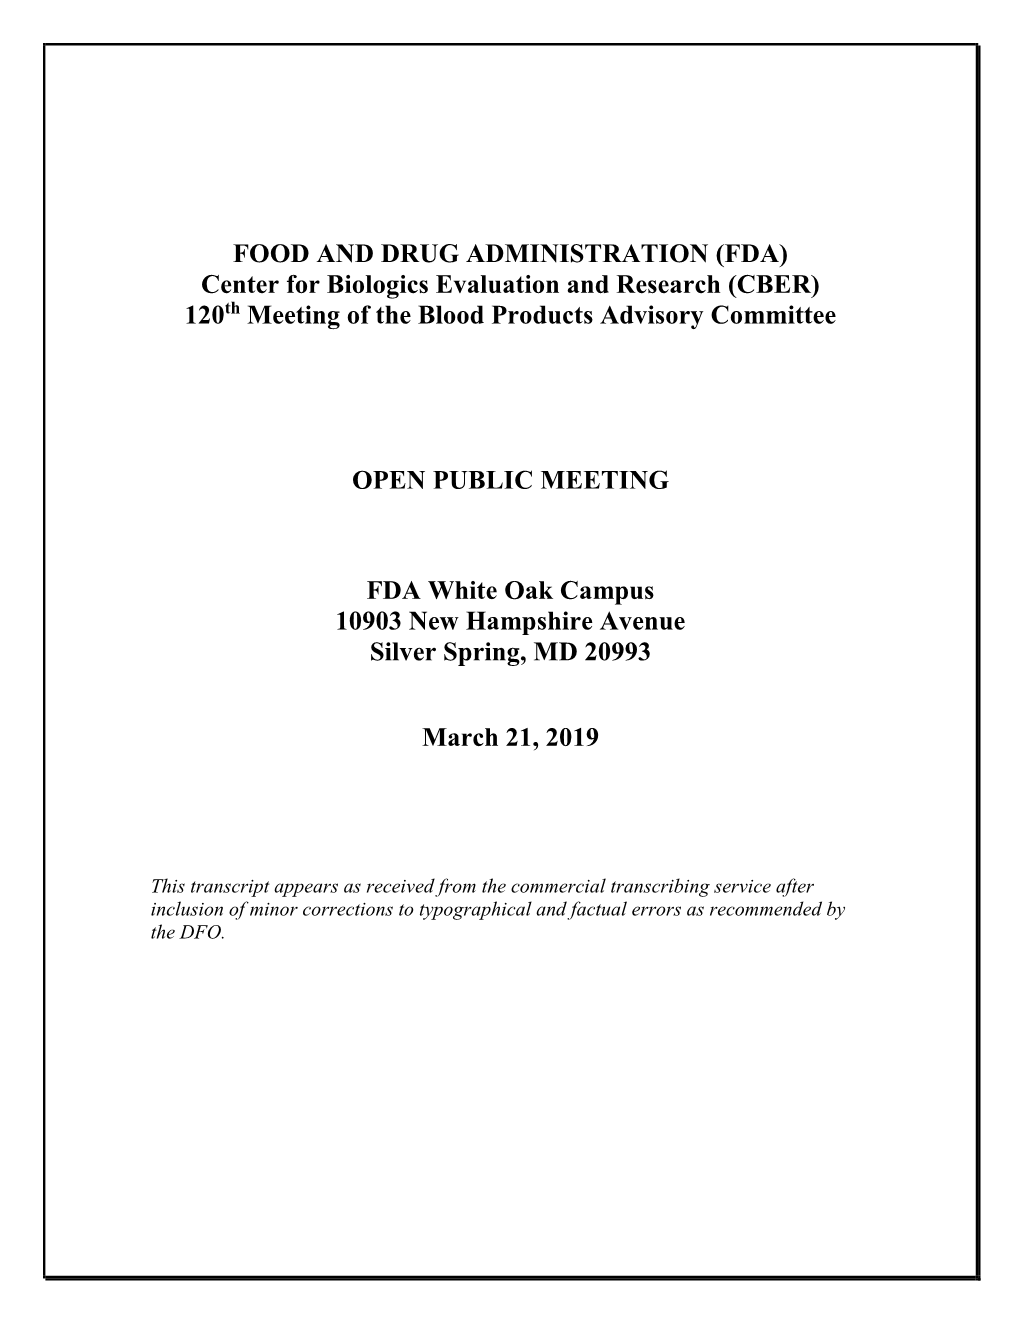 Blood Products Advisory Committee March 21, 2019 Meeting Transcript- Topic 3